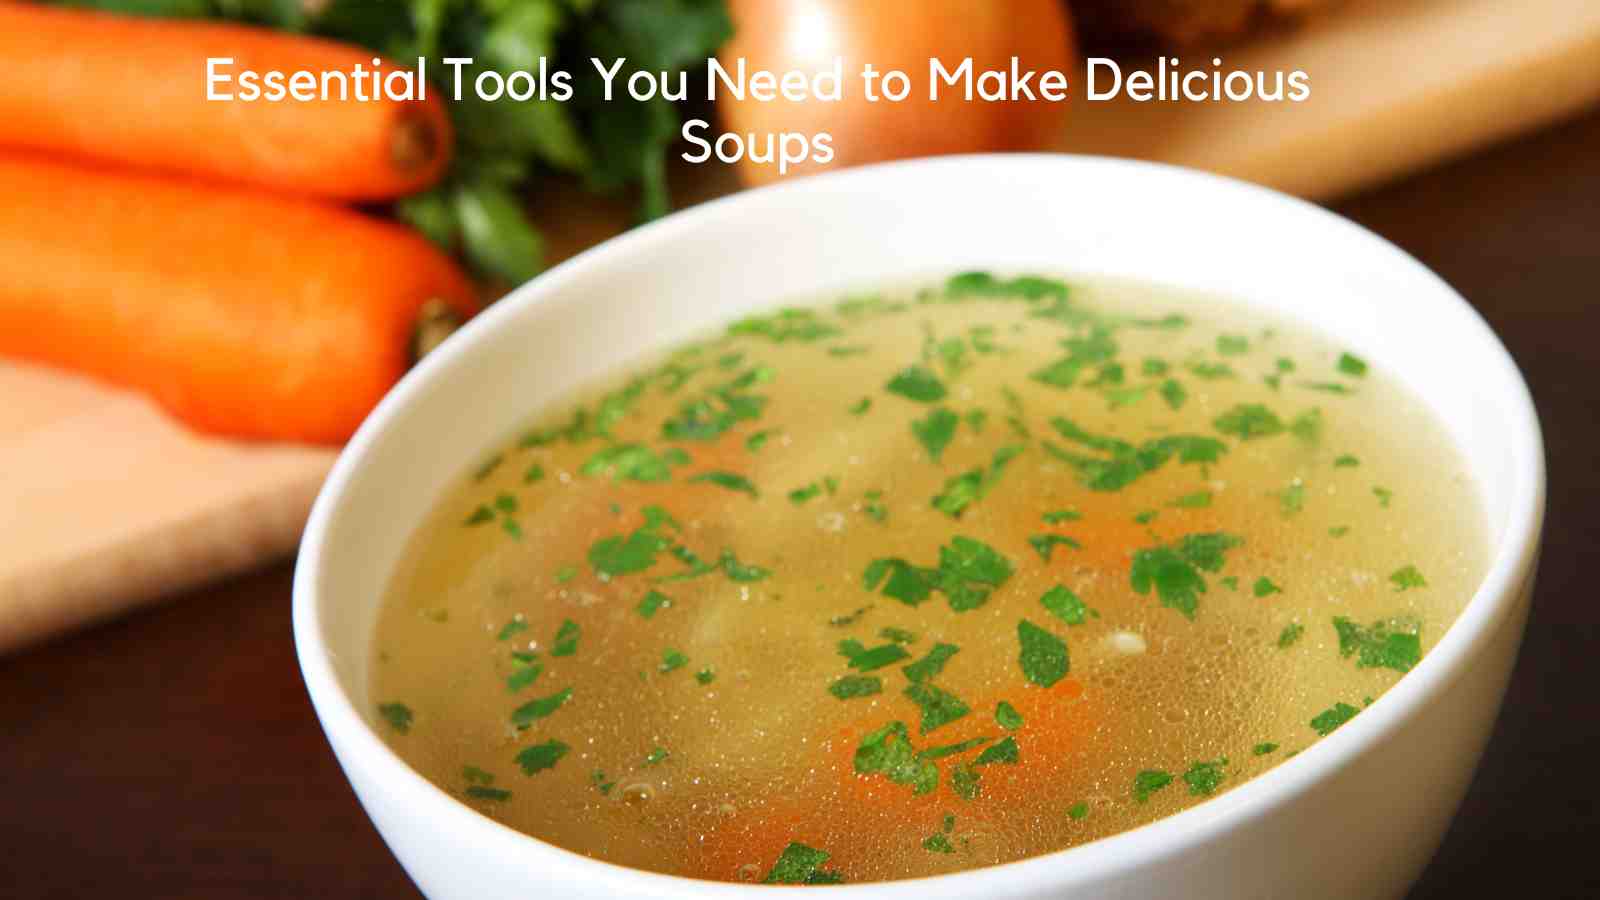 Essential Tools You Need to Make Delicious Soups